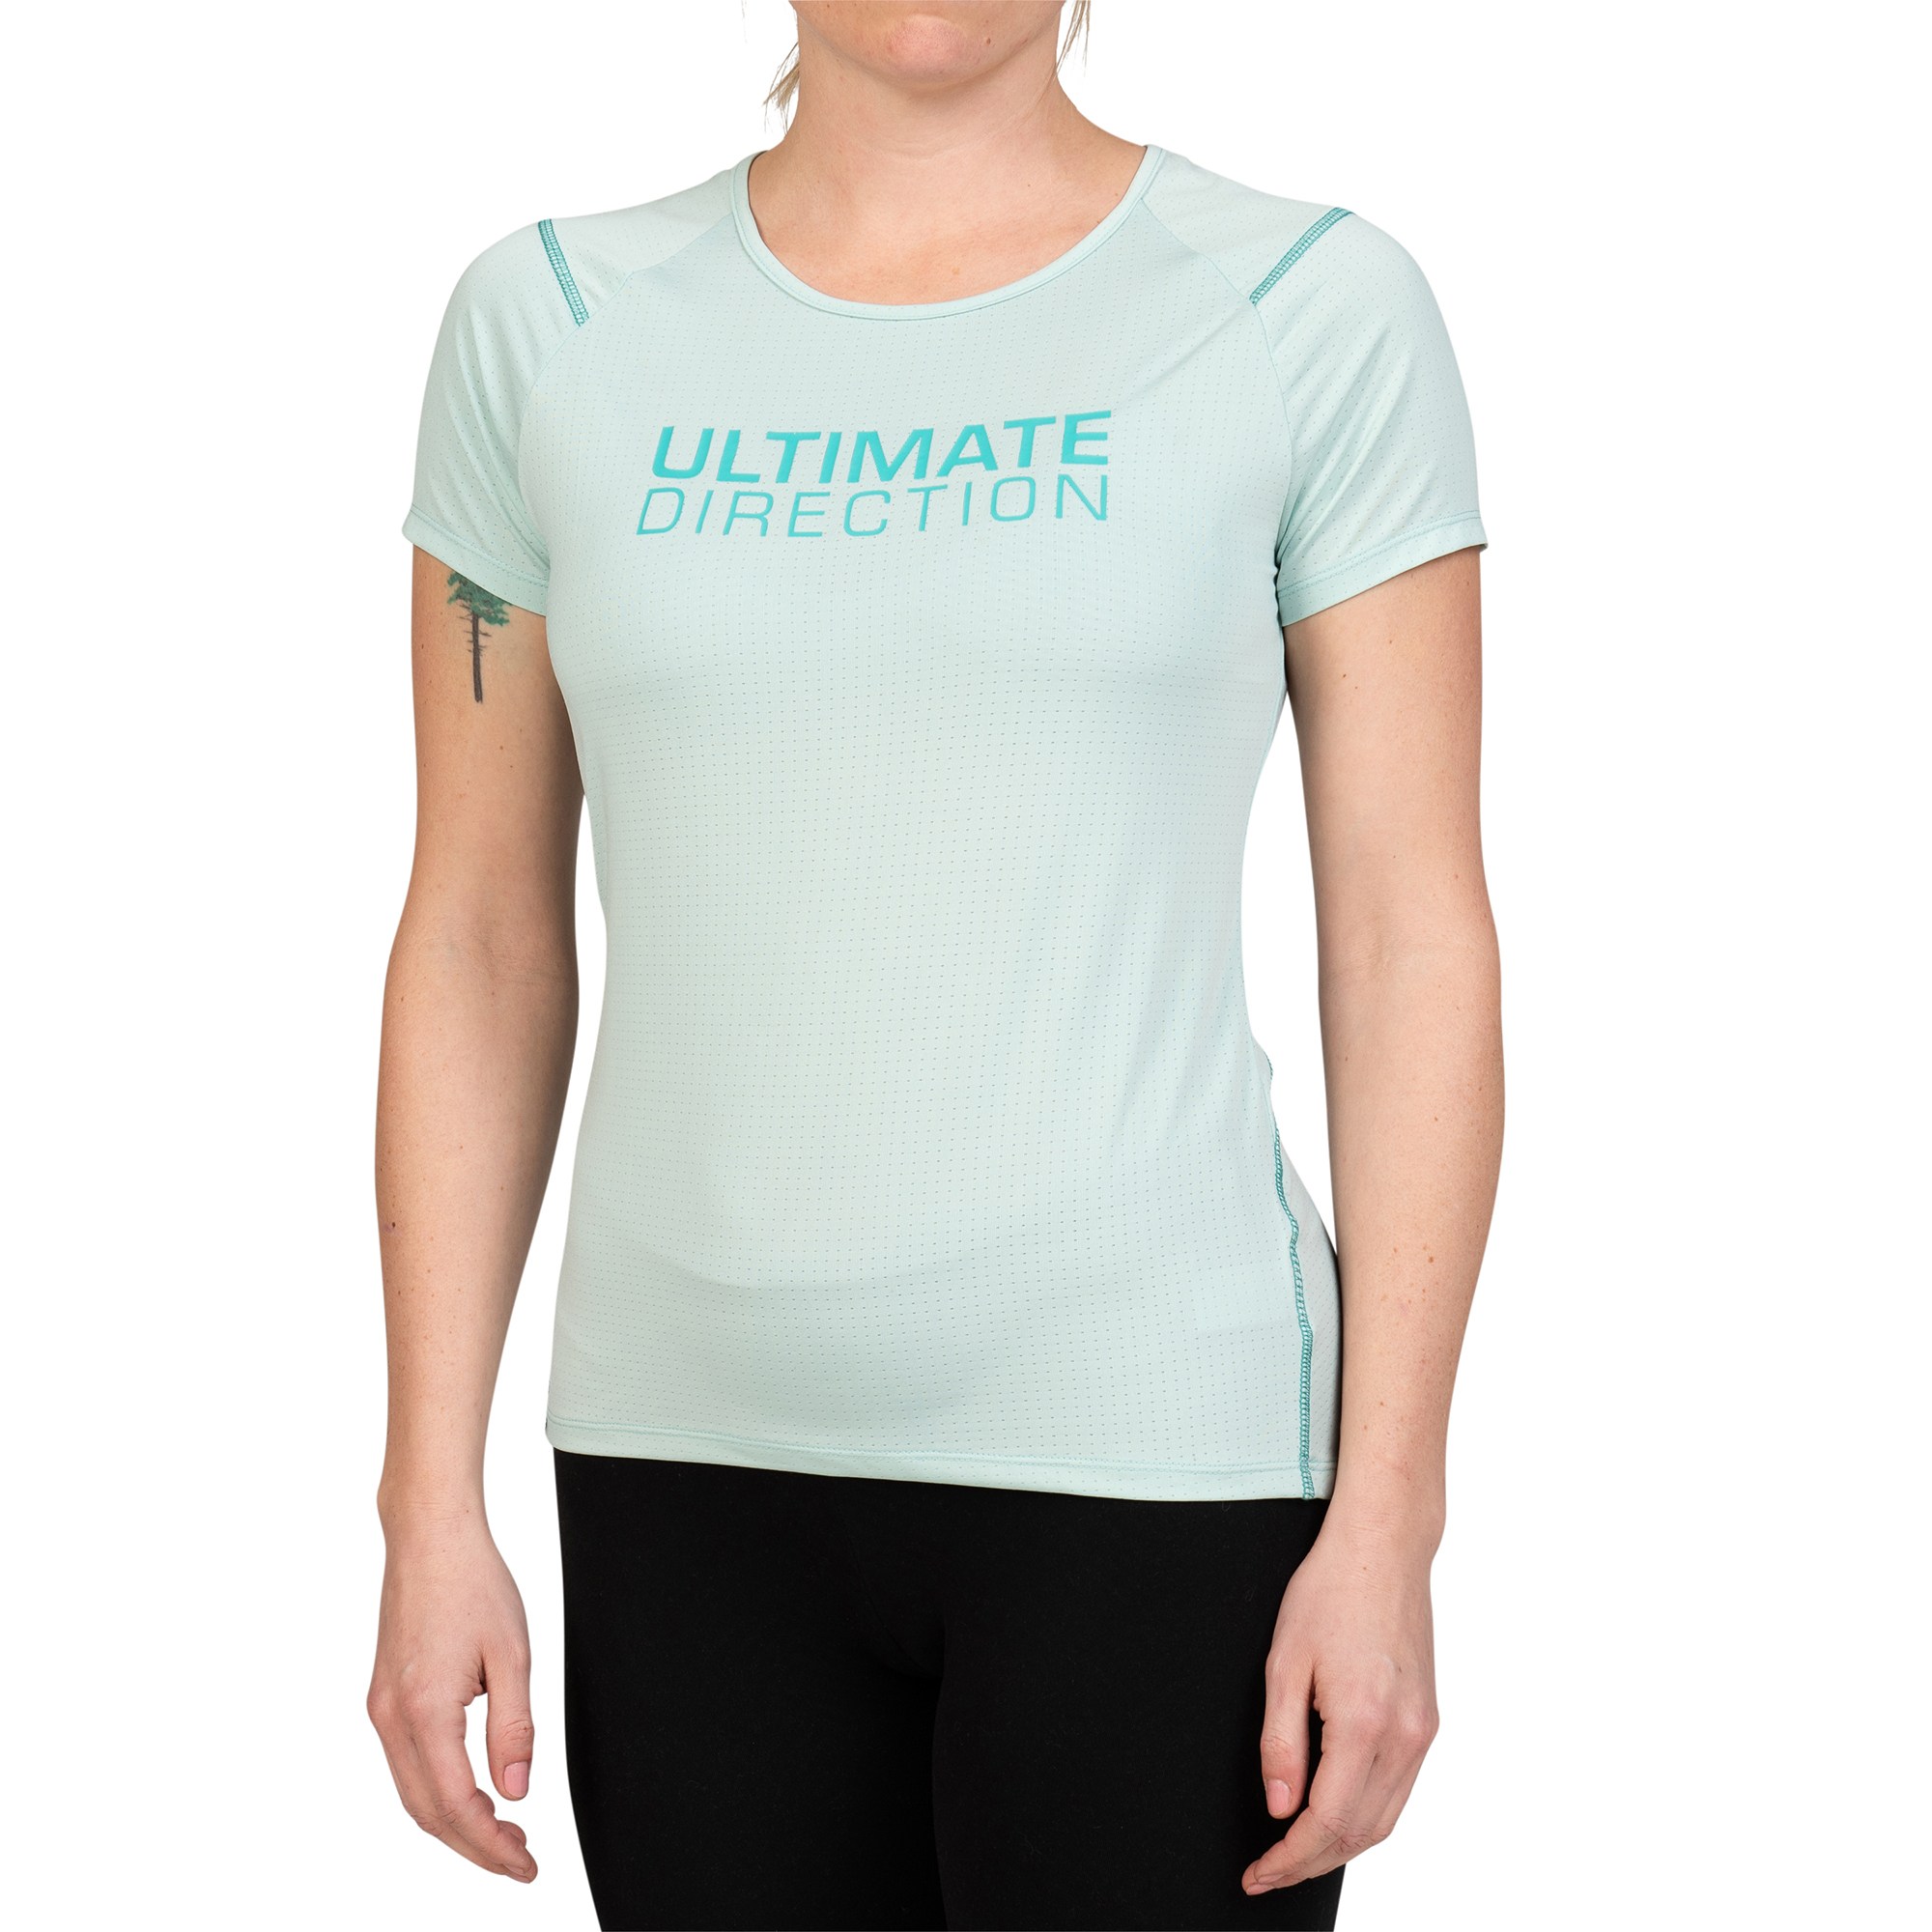 Ultimate Direction Women's Tech T-Shirt in Lichen Size Small